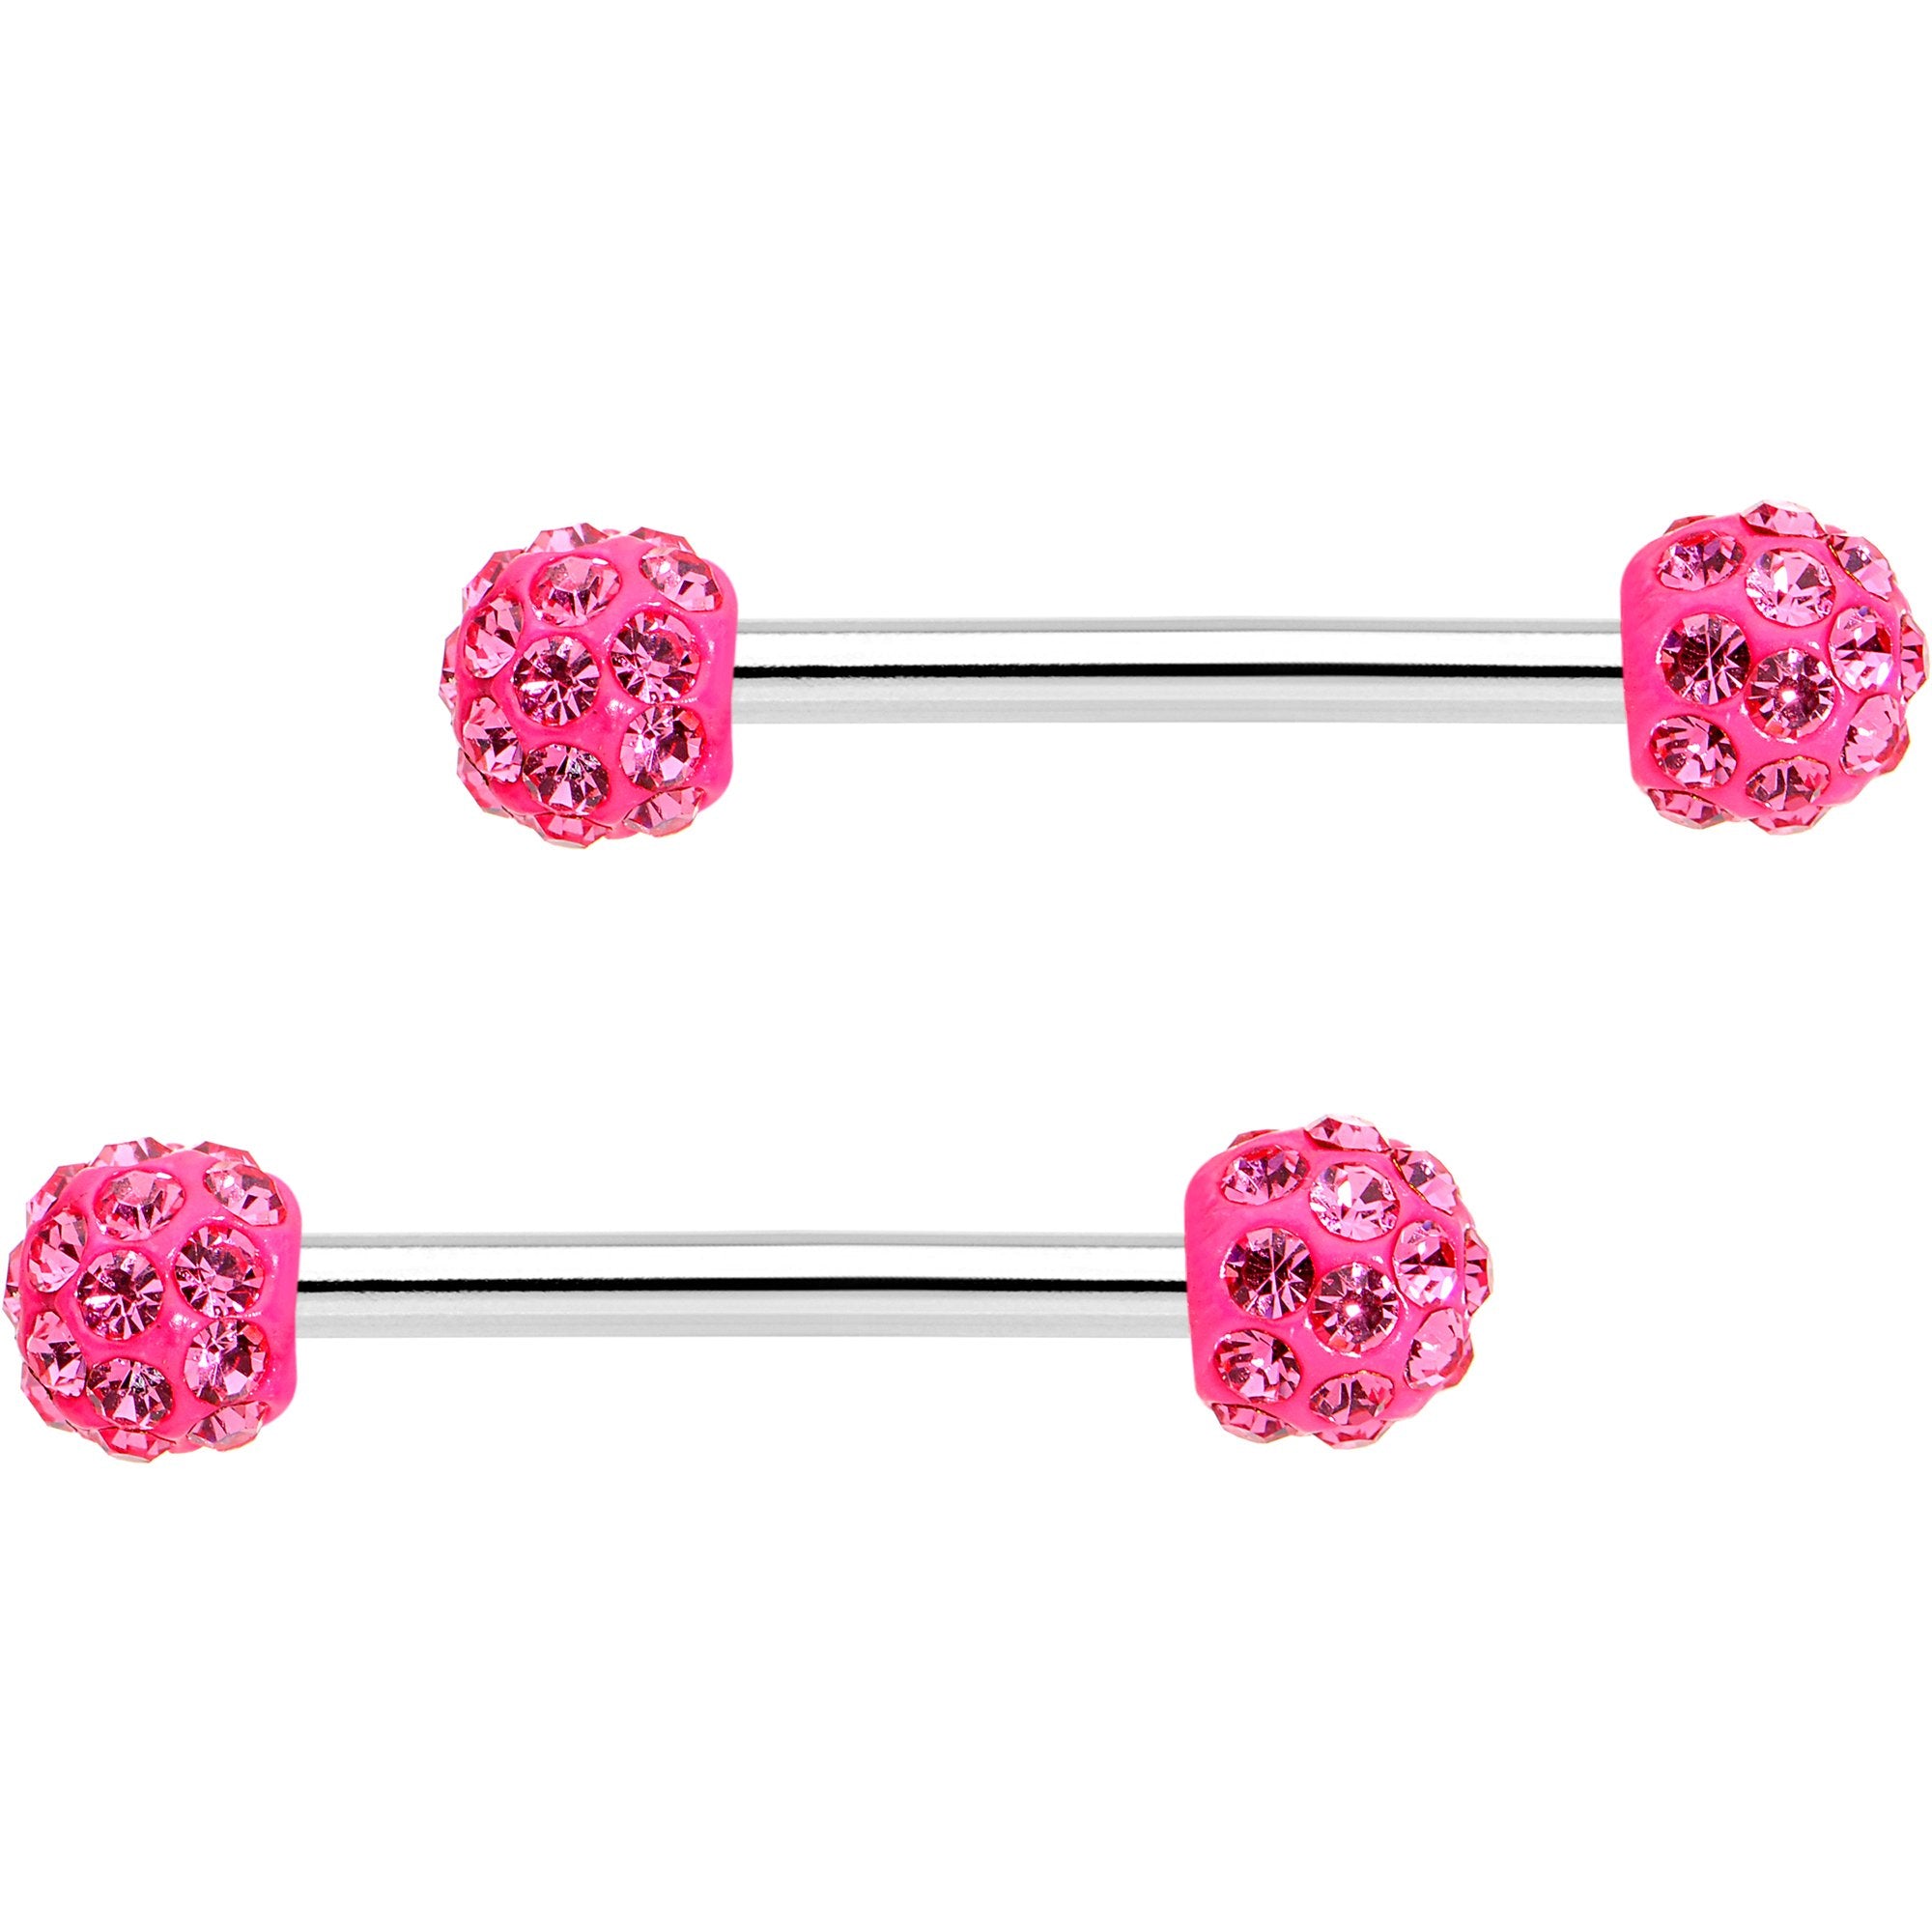 14 Gauge 9/16 All About Fun Barbell Nipple Ring Pack Set of 6